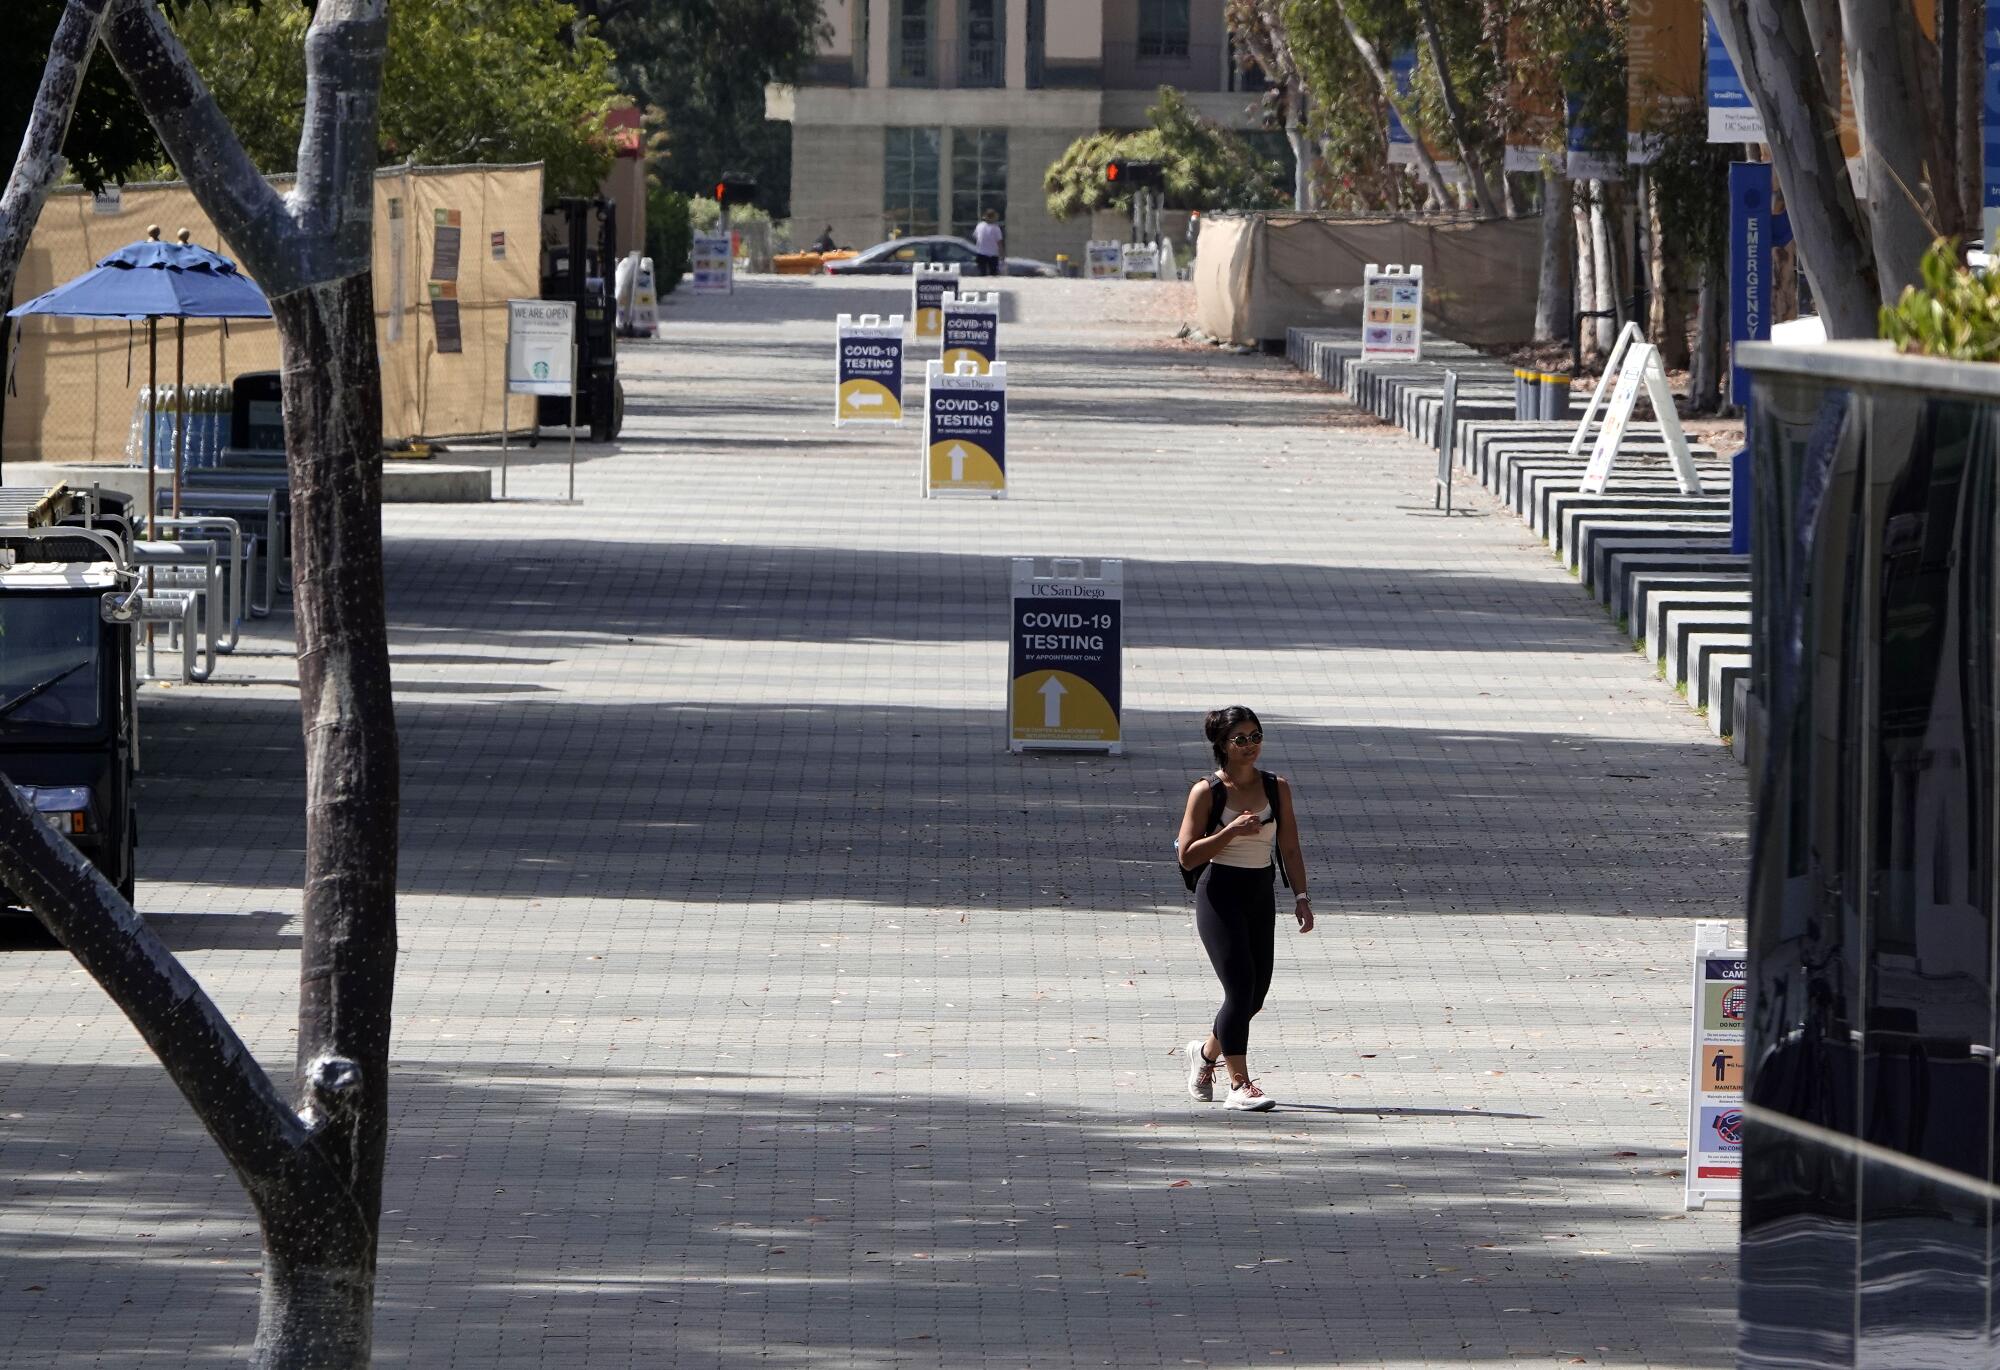 UCSD was a largely a ghost town last August due to restrictions arising from the coronavirus